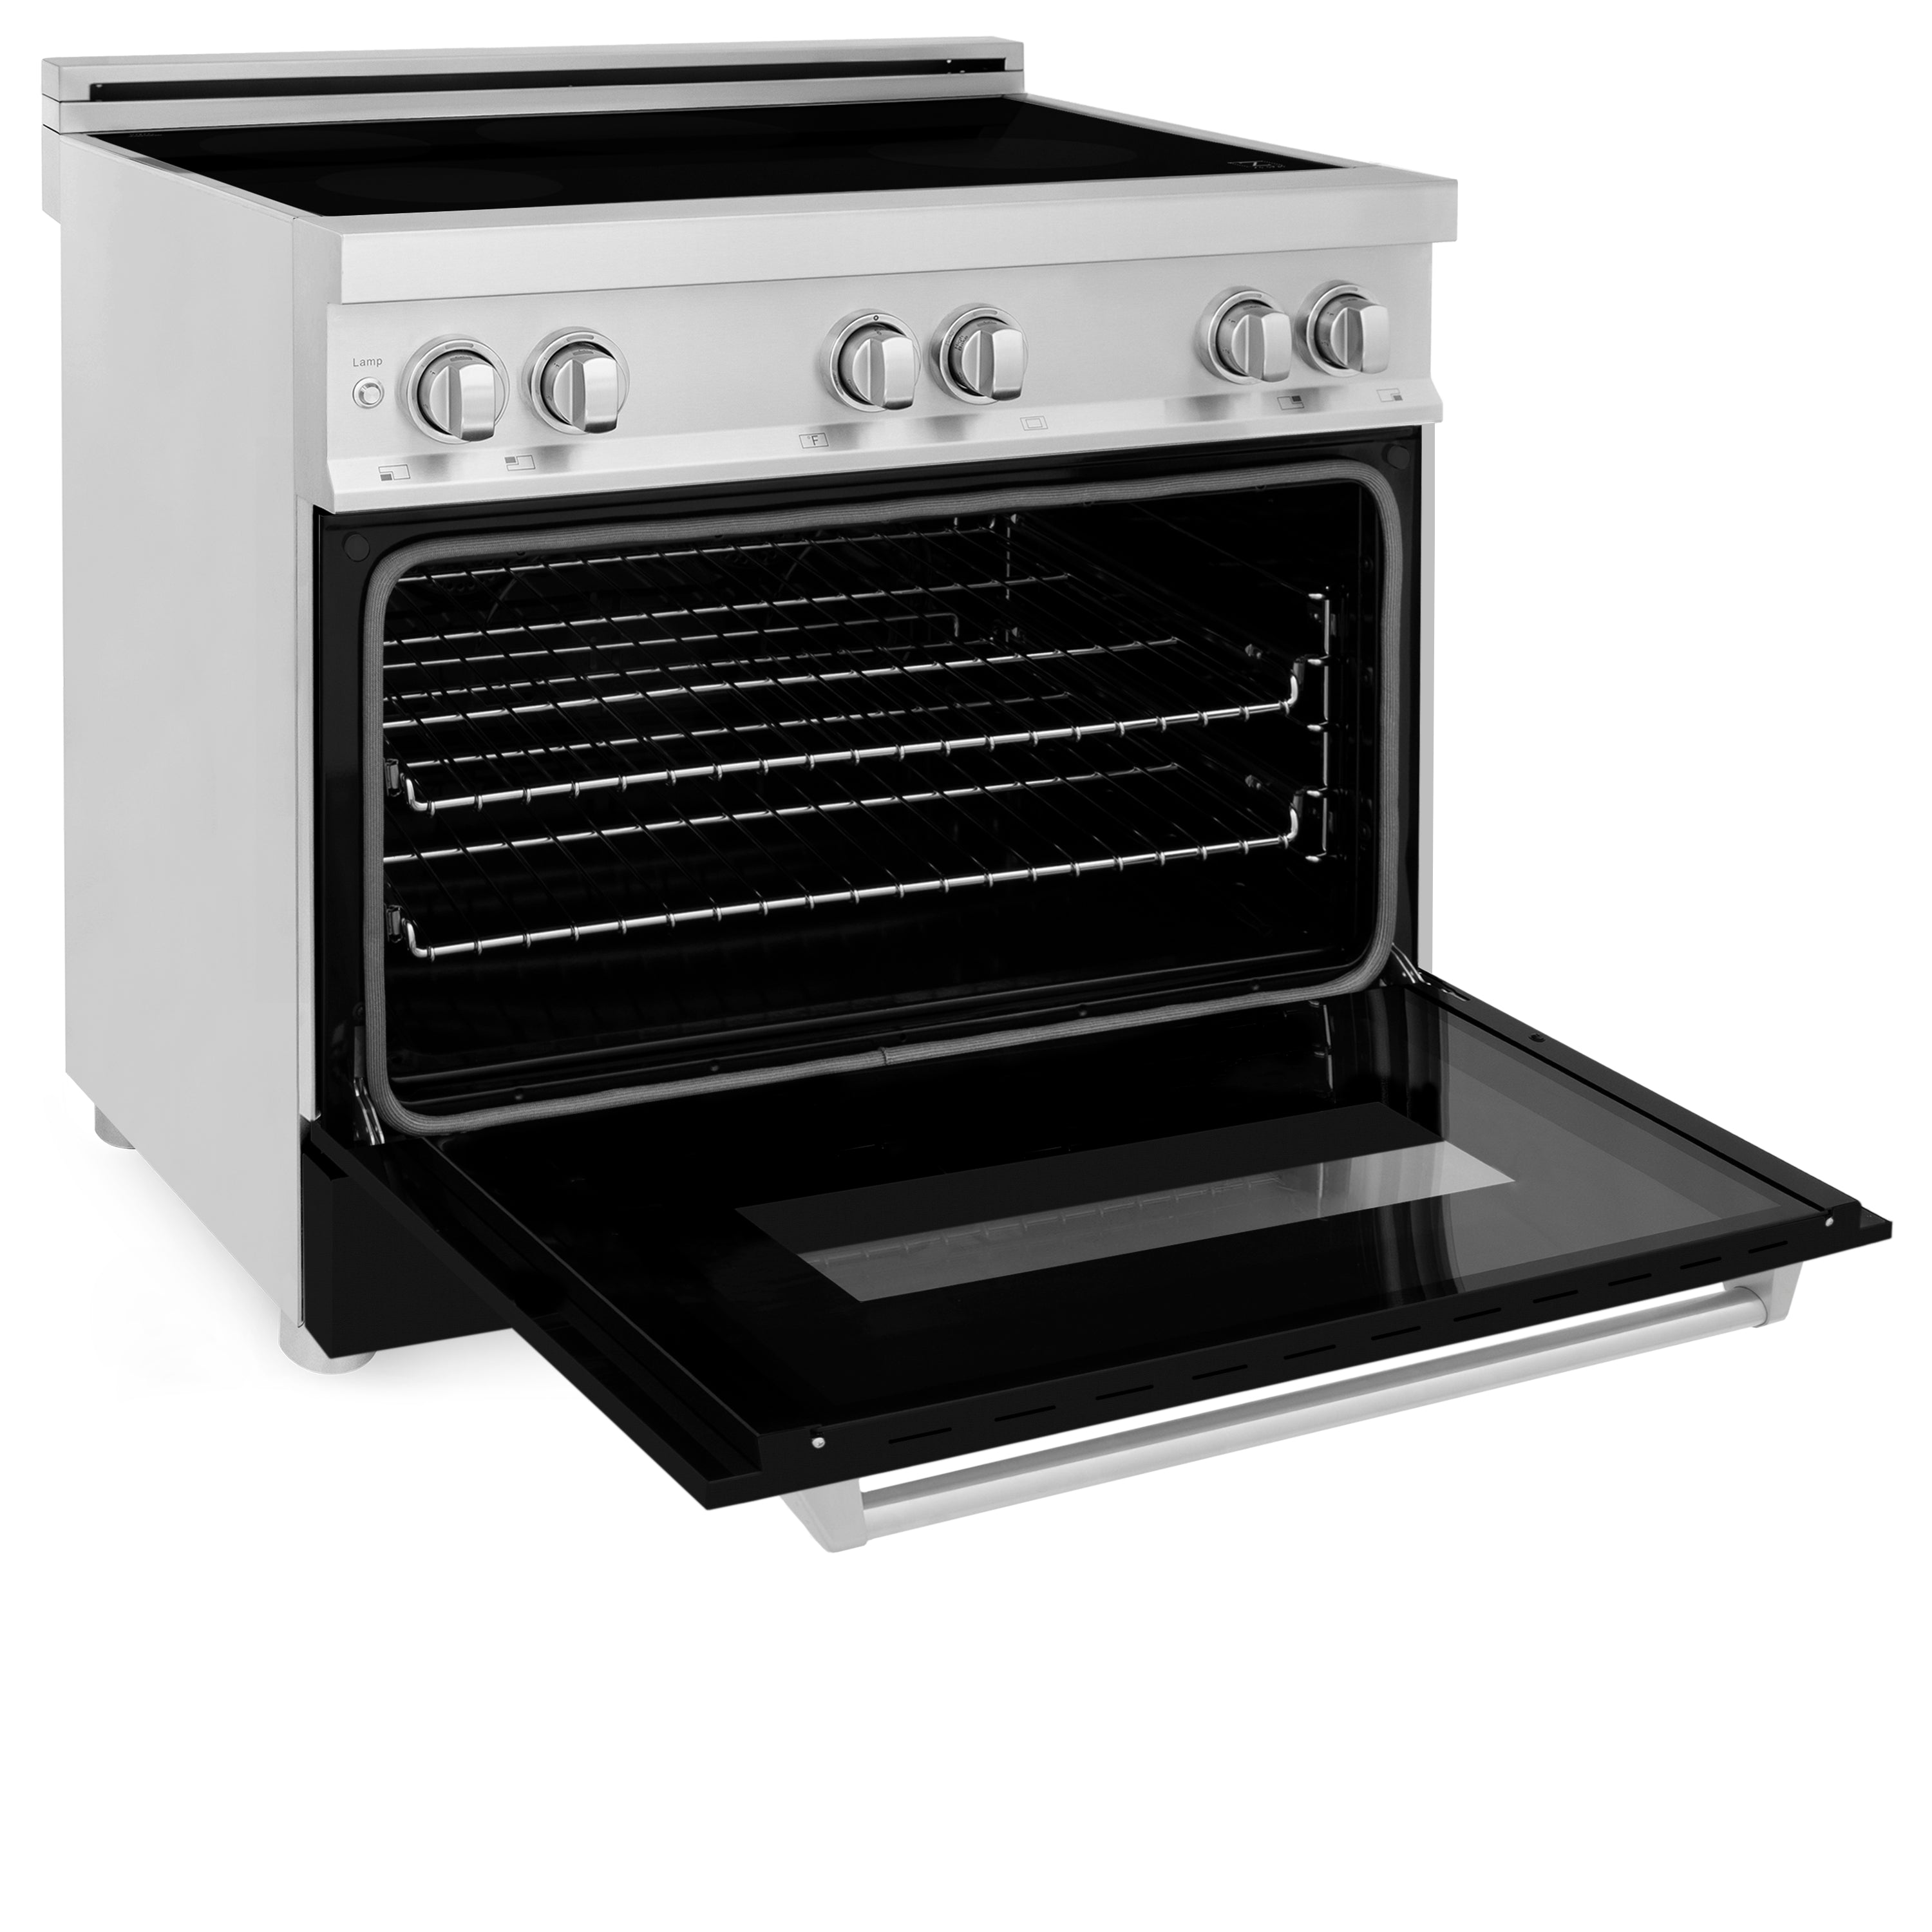 ZLINE 36" 4.6 cu. ft. Induction Range with a 4 Element Stove and Electric Oven in Black Matte (RAIND-BLM-36)